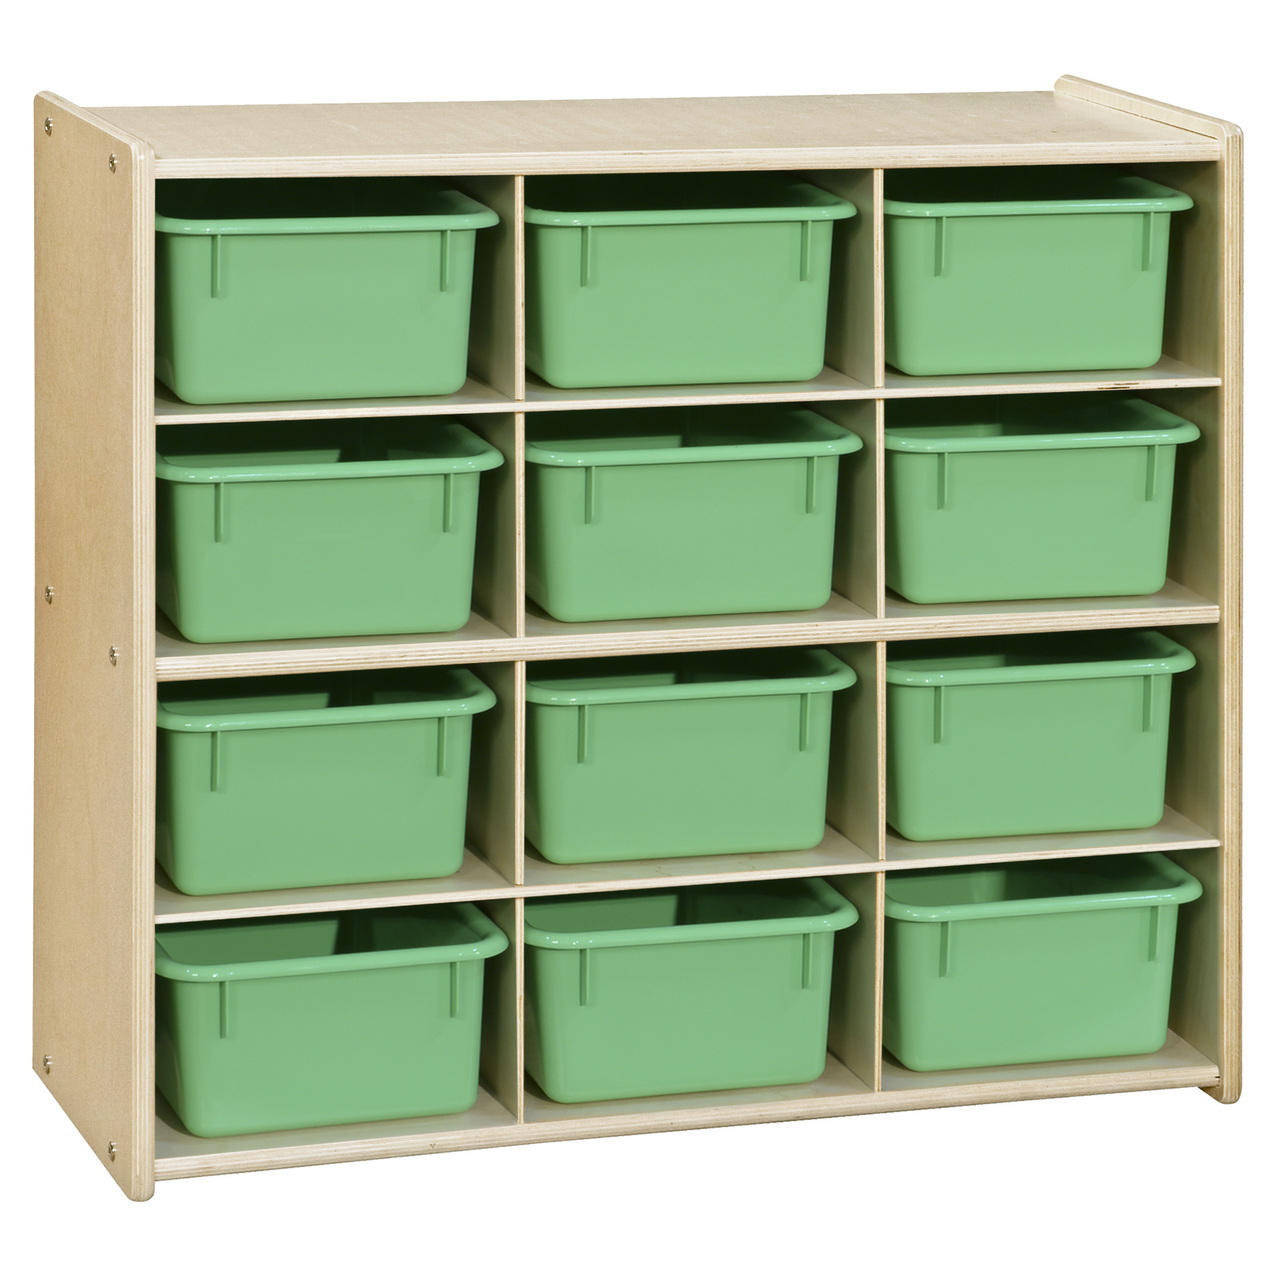 https://cdn11.bigcommerce.com/s-kd3y7/images/stencil/1280x1280/products/1451/54159/contender-c16129flg-baltic-birch-12-cubby-storage-unit-wlime-green-tubs-assembled__64427.1691768903.jpg?c=2